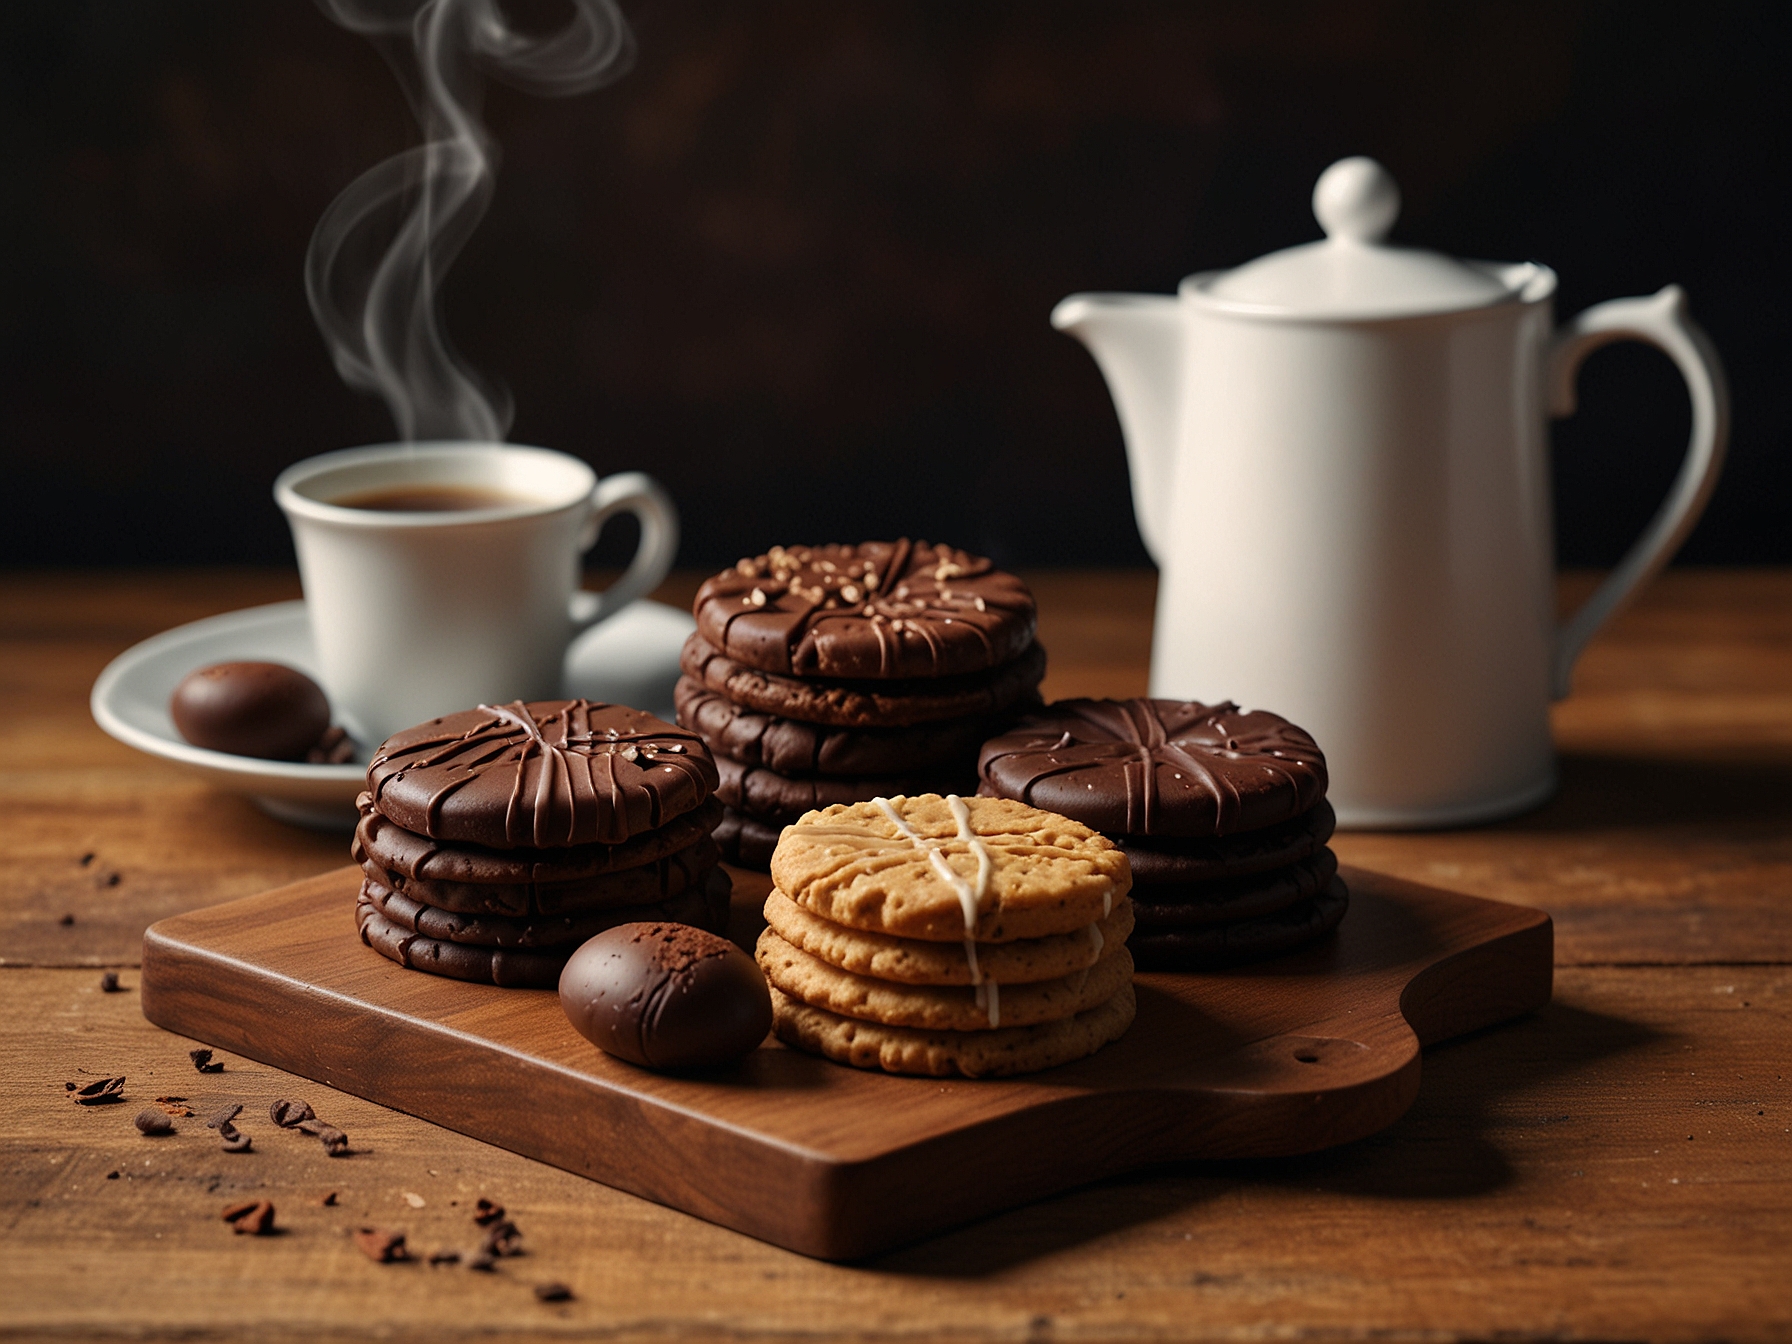 An array of luxury chocolate biscuits, including the recently downsized Choco Leibniz pack and other contenders, arranged on a wooden platter next to a steaming cup of tea.